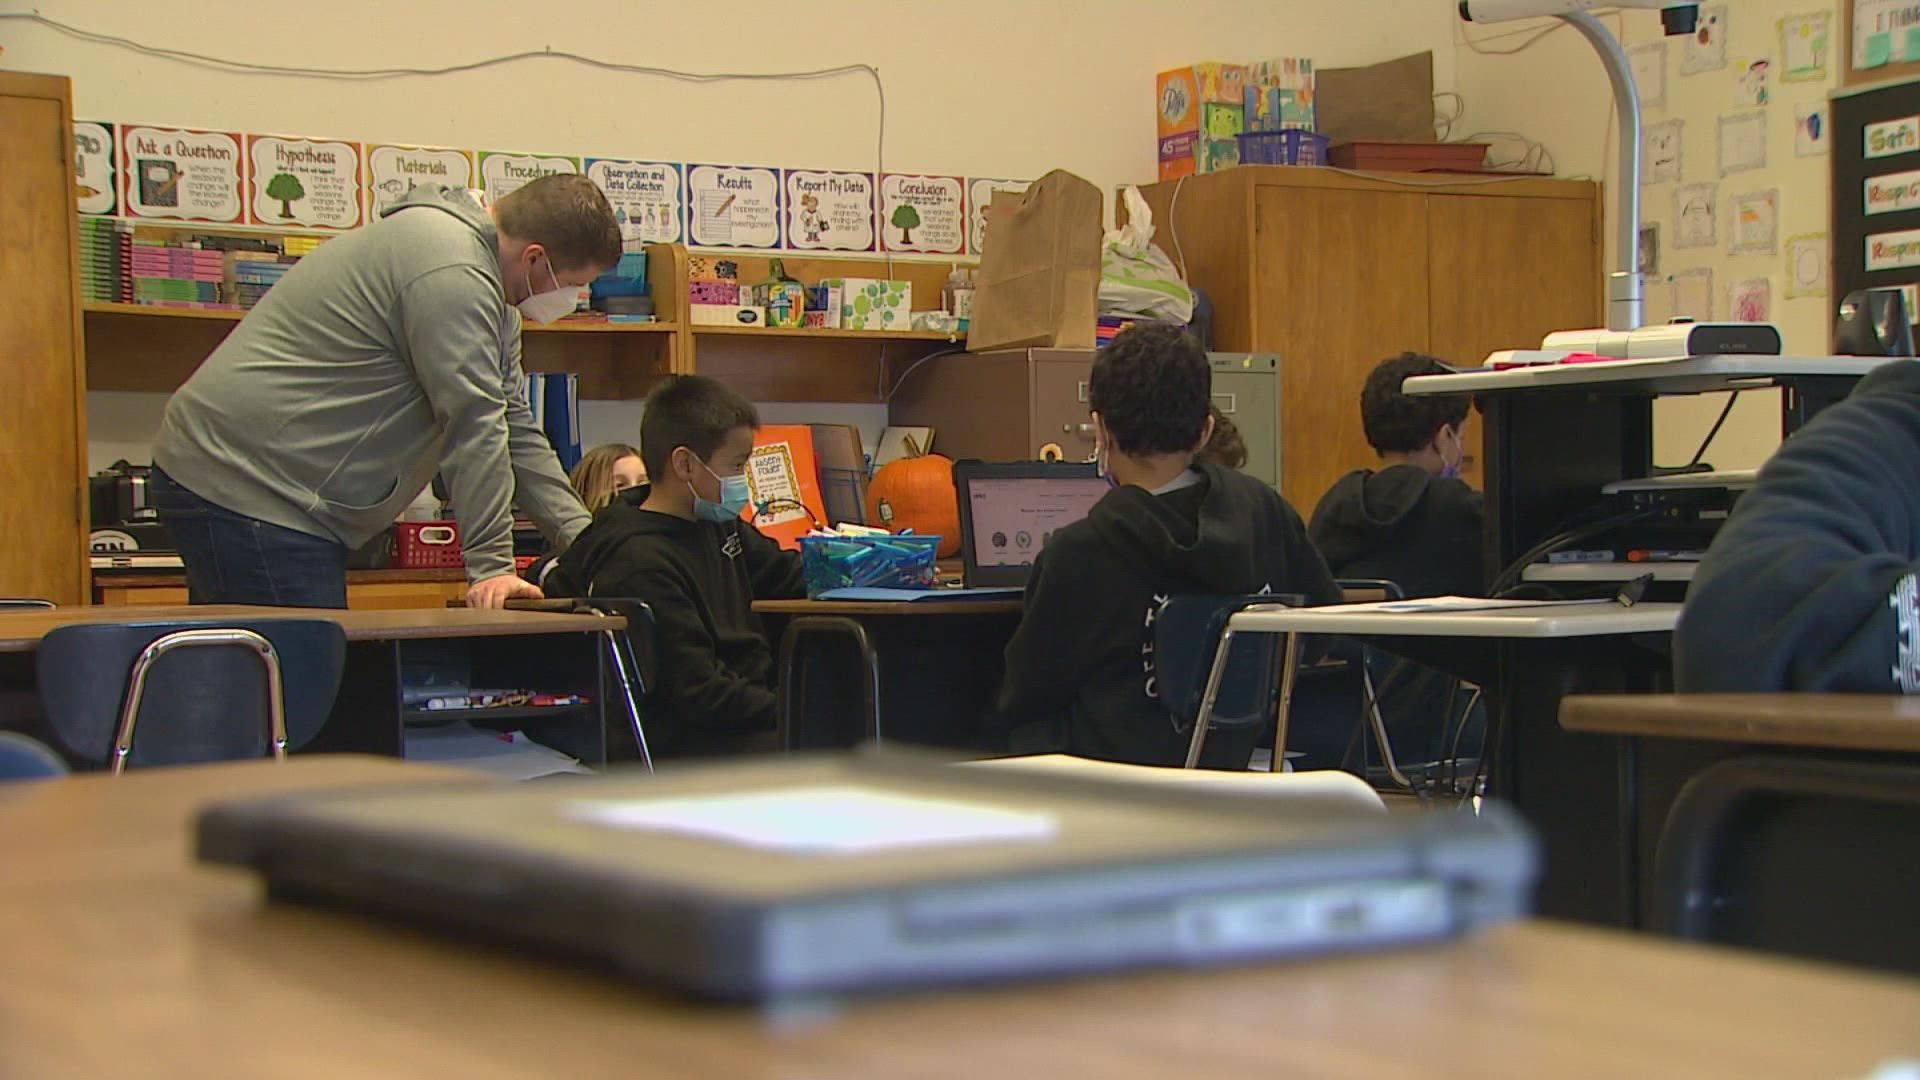 The bill, which passed in the Senate, would provide up to $525 million to begin funding the strengthening of Washington state schools against earthquakes.